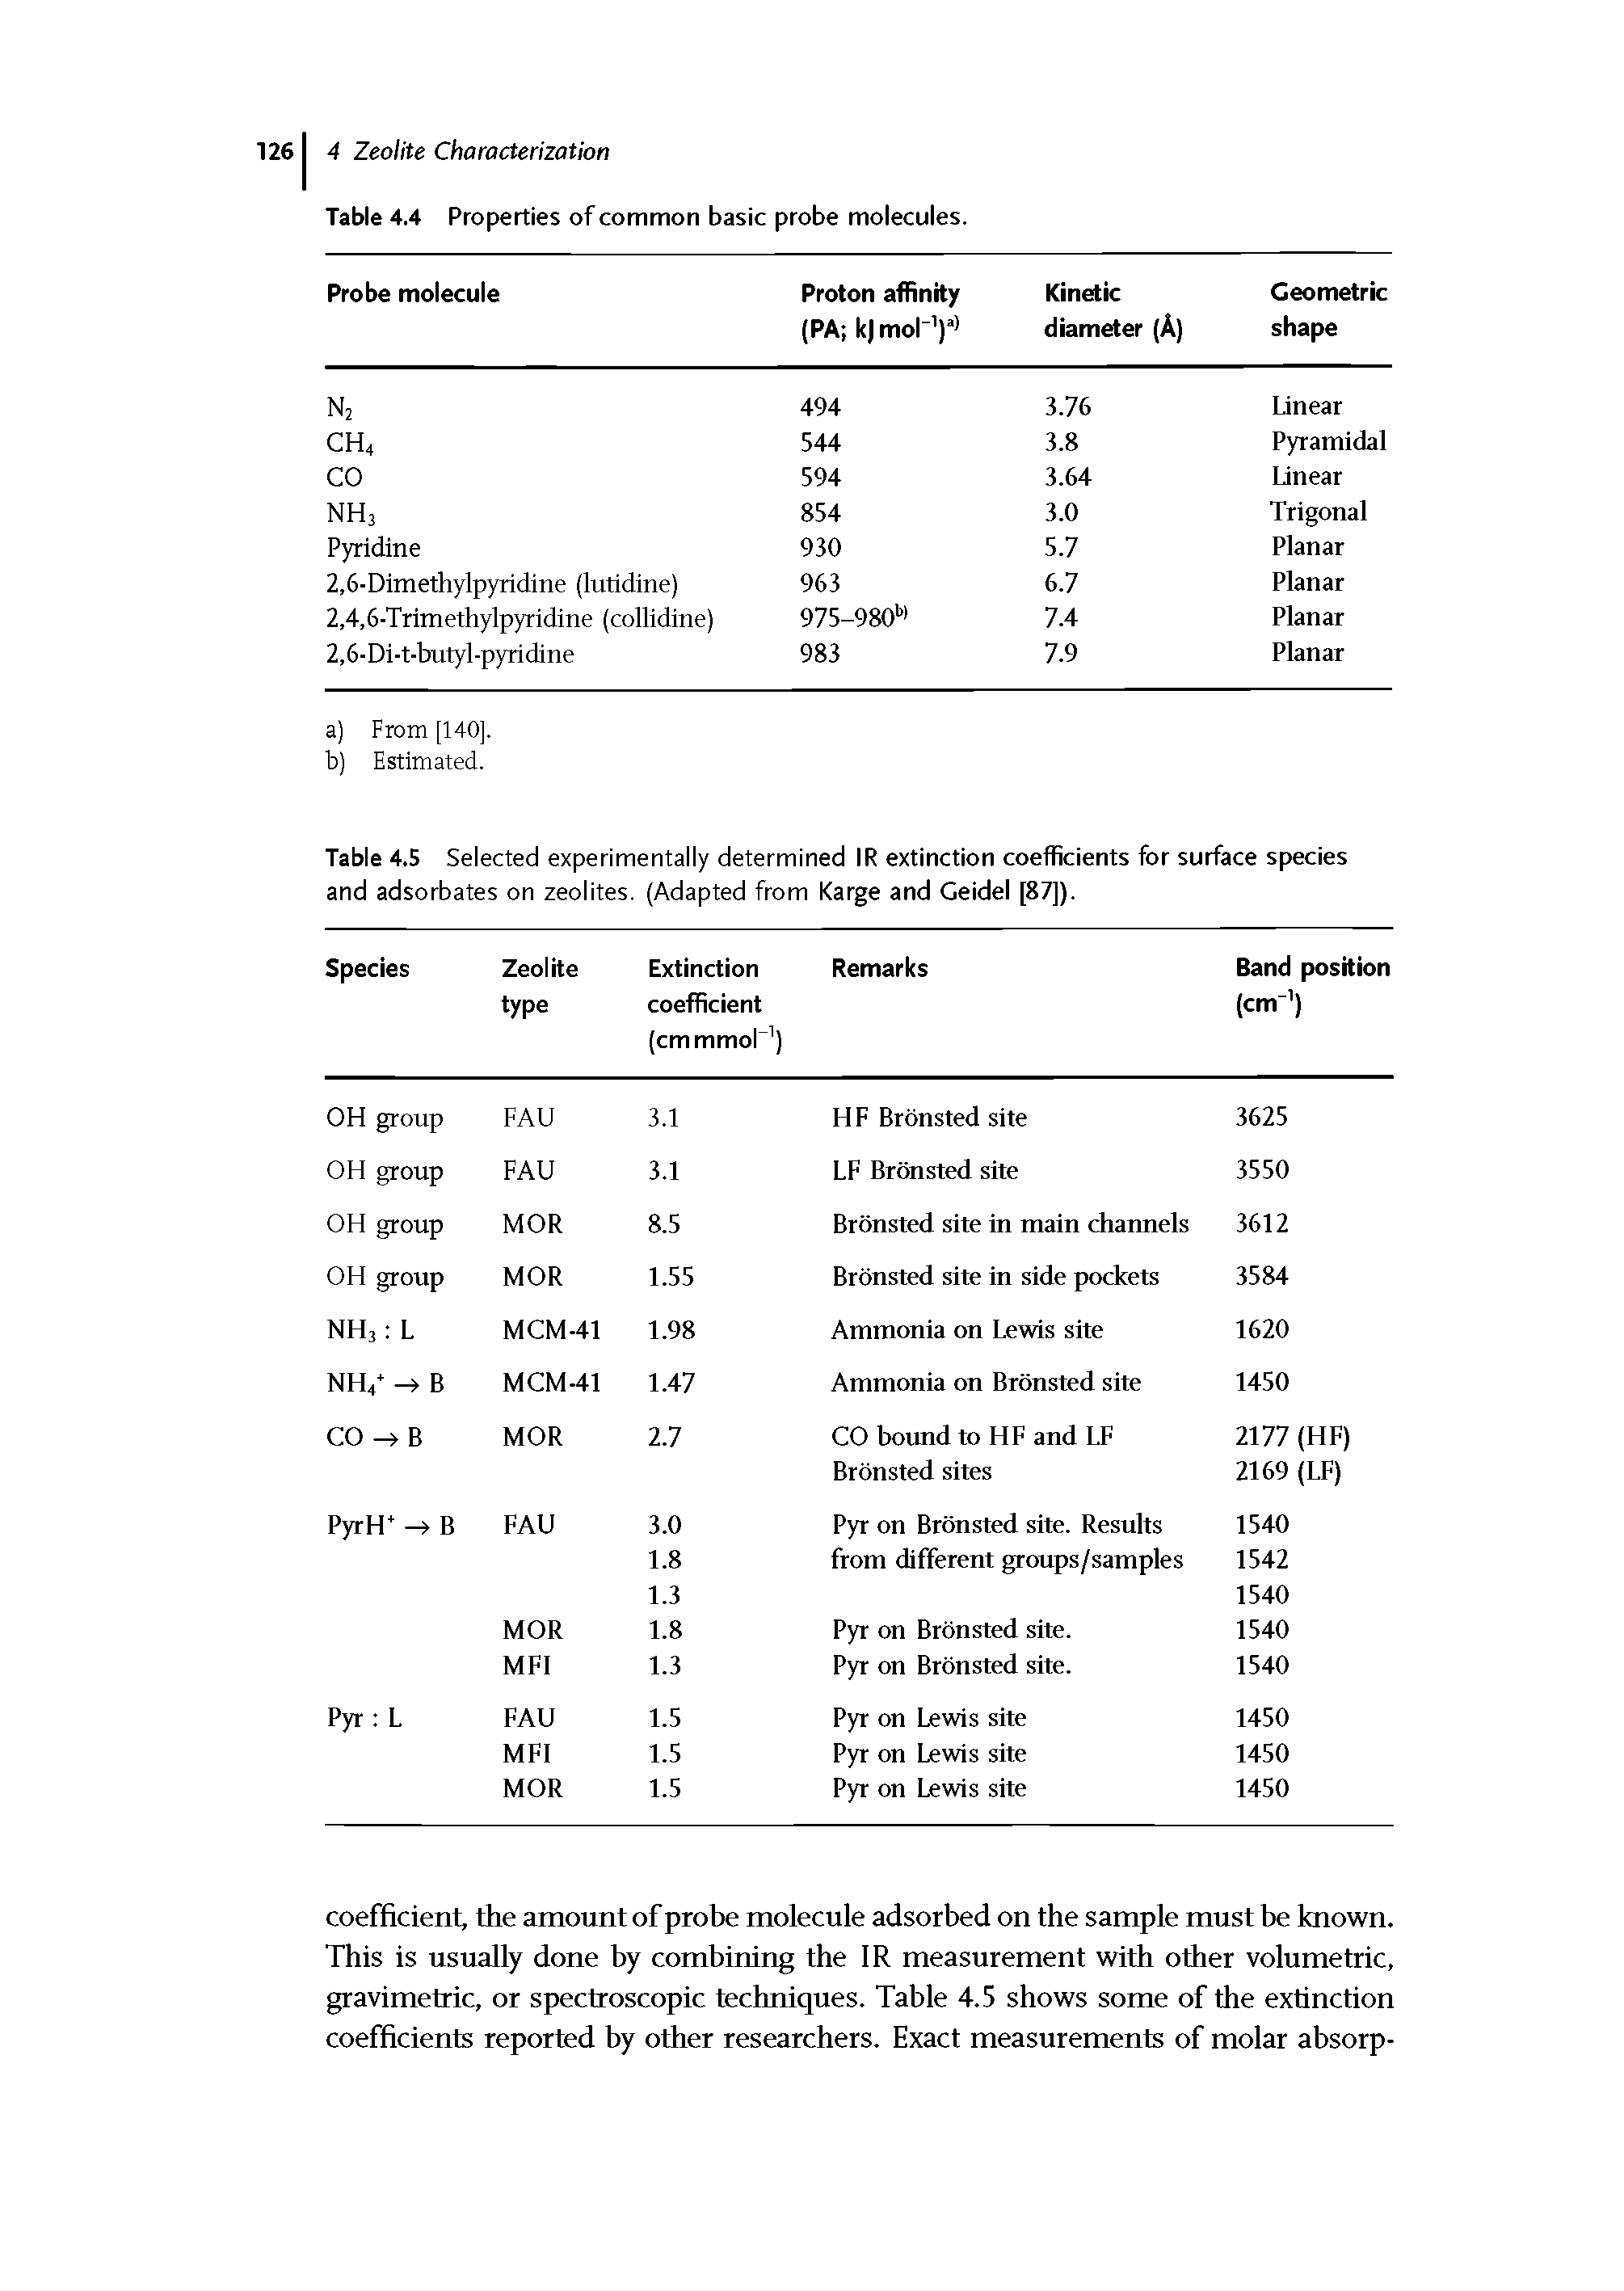 Table 4.5 Selected experimentally determined IR extinction coefficients for surface species and adsorbates on zeolites. (Adapted from Karge and Geidel [87]).